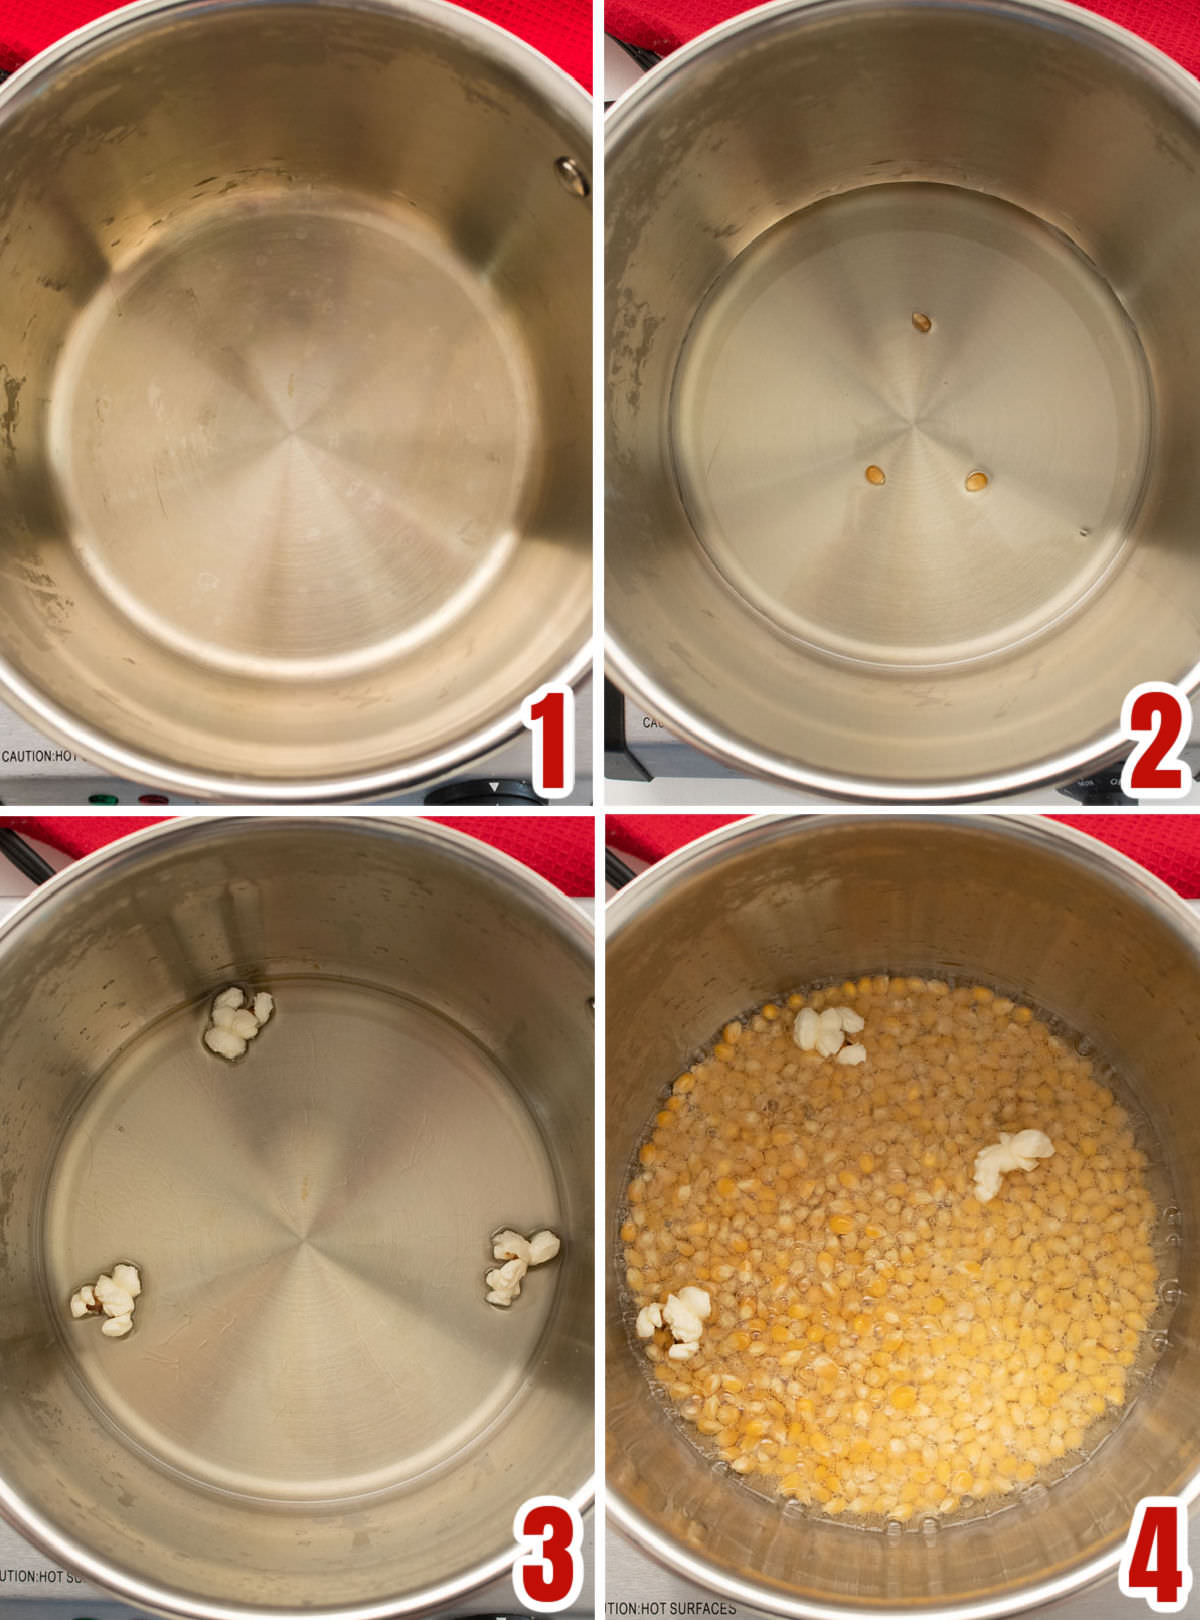 Collage image showing the steps required to make popcorn on the stove.